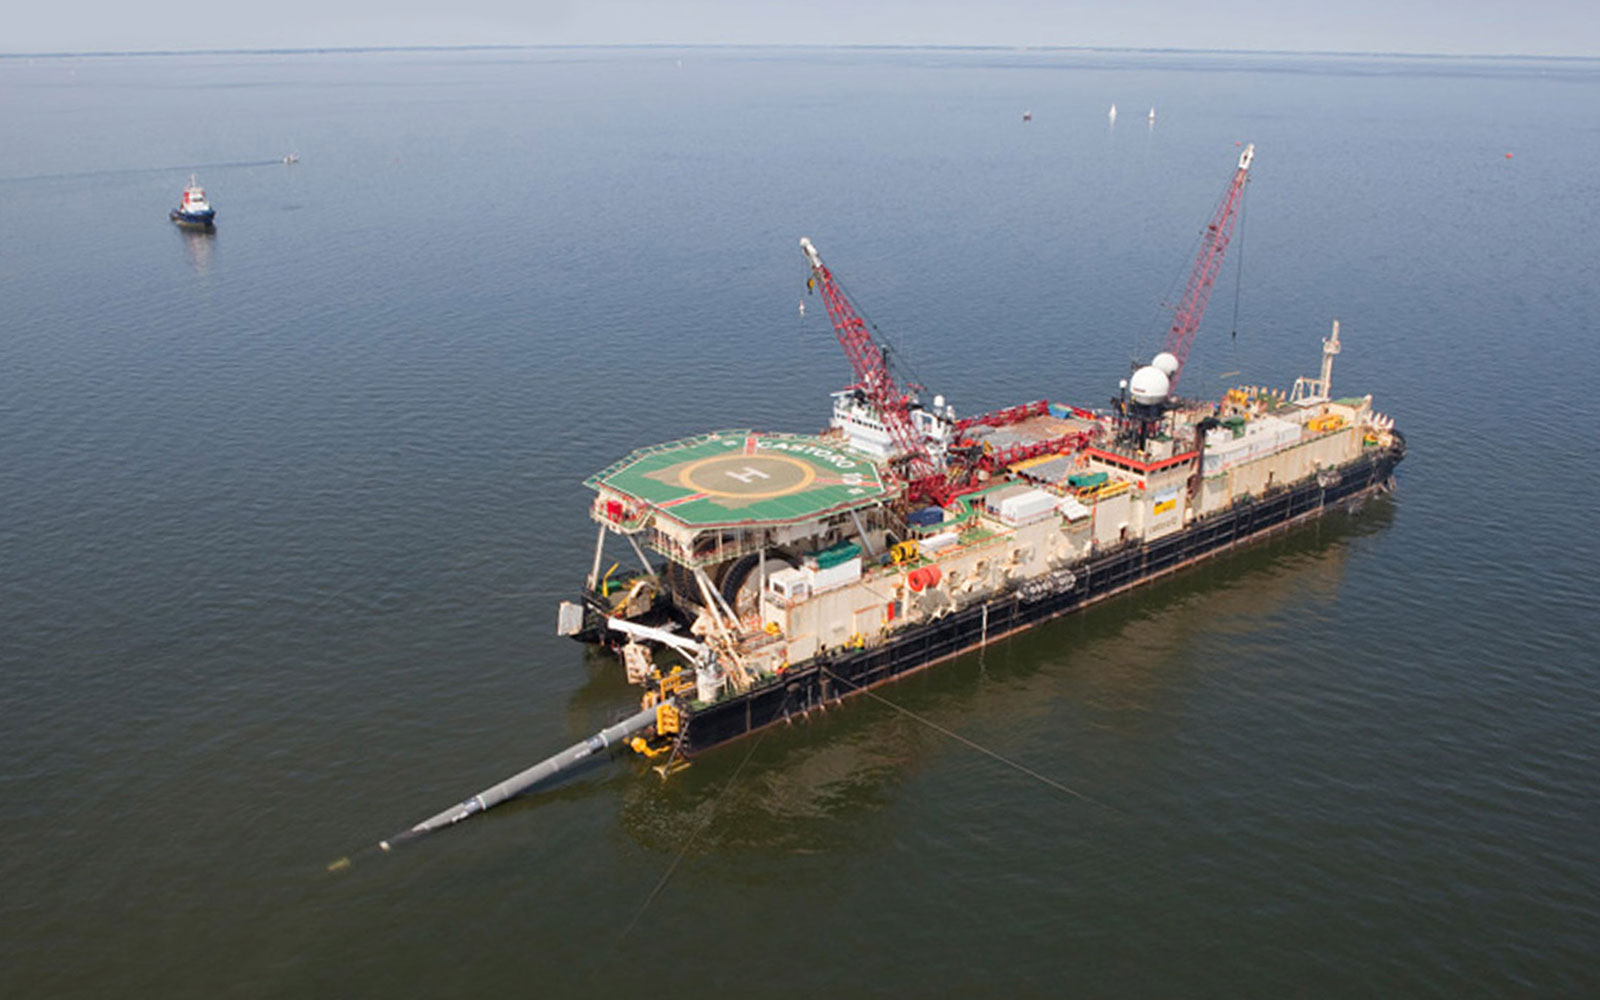 Castoro 10 pipelay barge will carry out offshore operations for this FSRU project; Source: Saipem